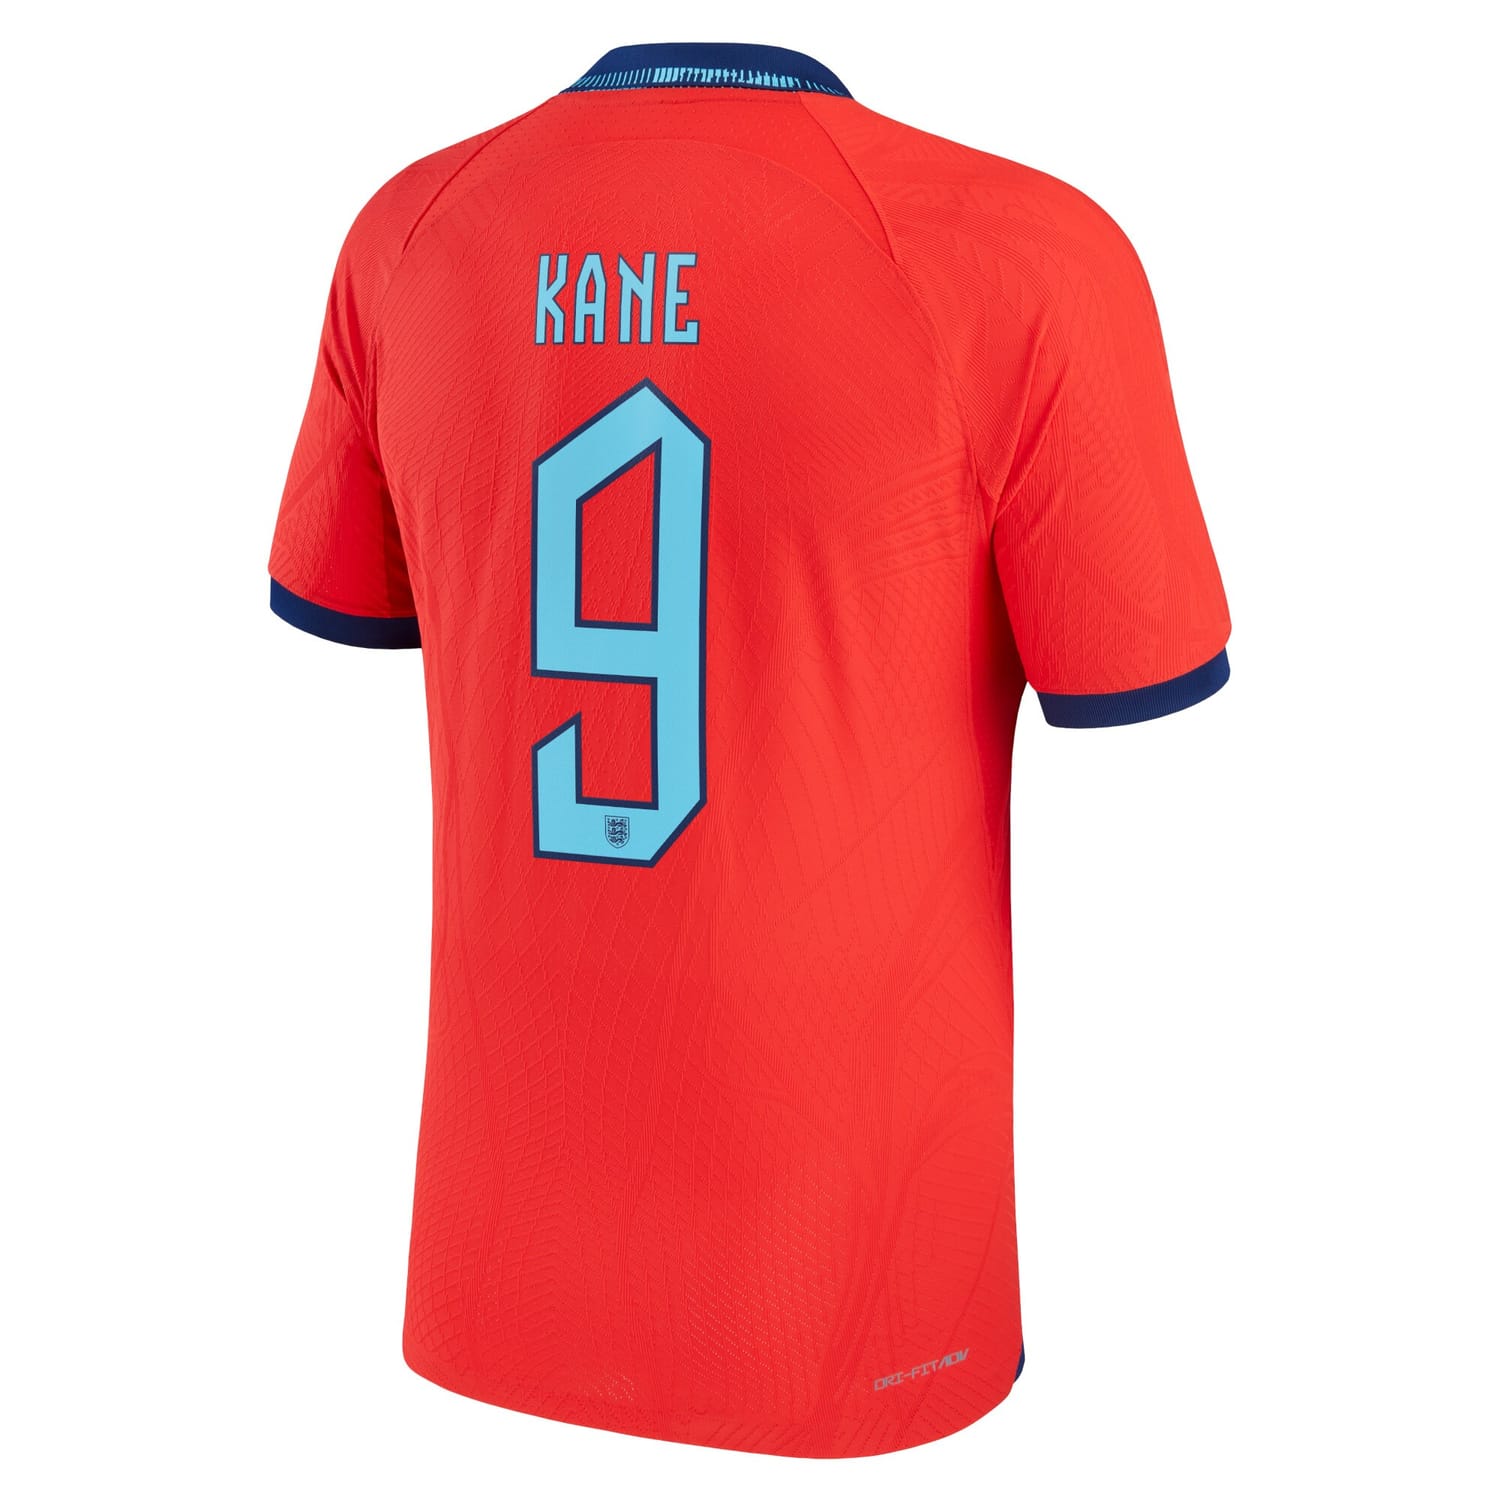 England National Team Away Authentic Jersey Shirt Red 2022-23 player Harry Kane printing for Men